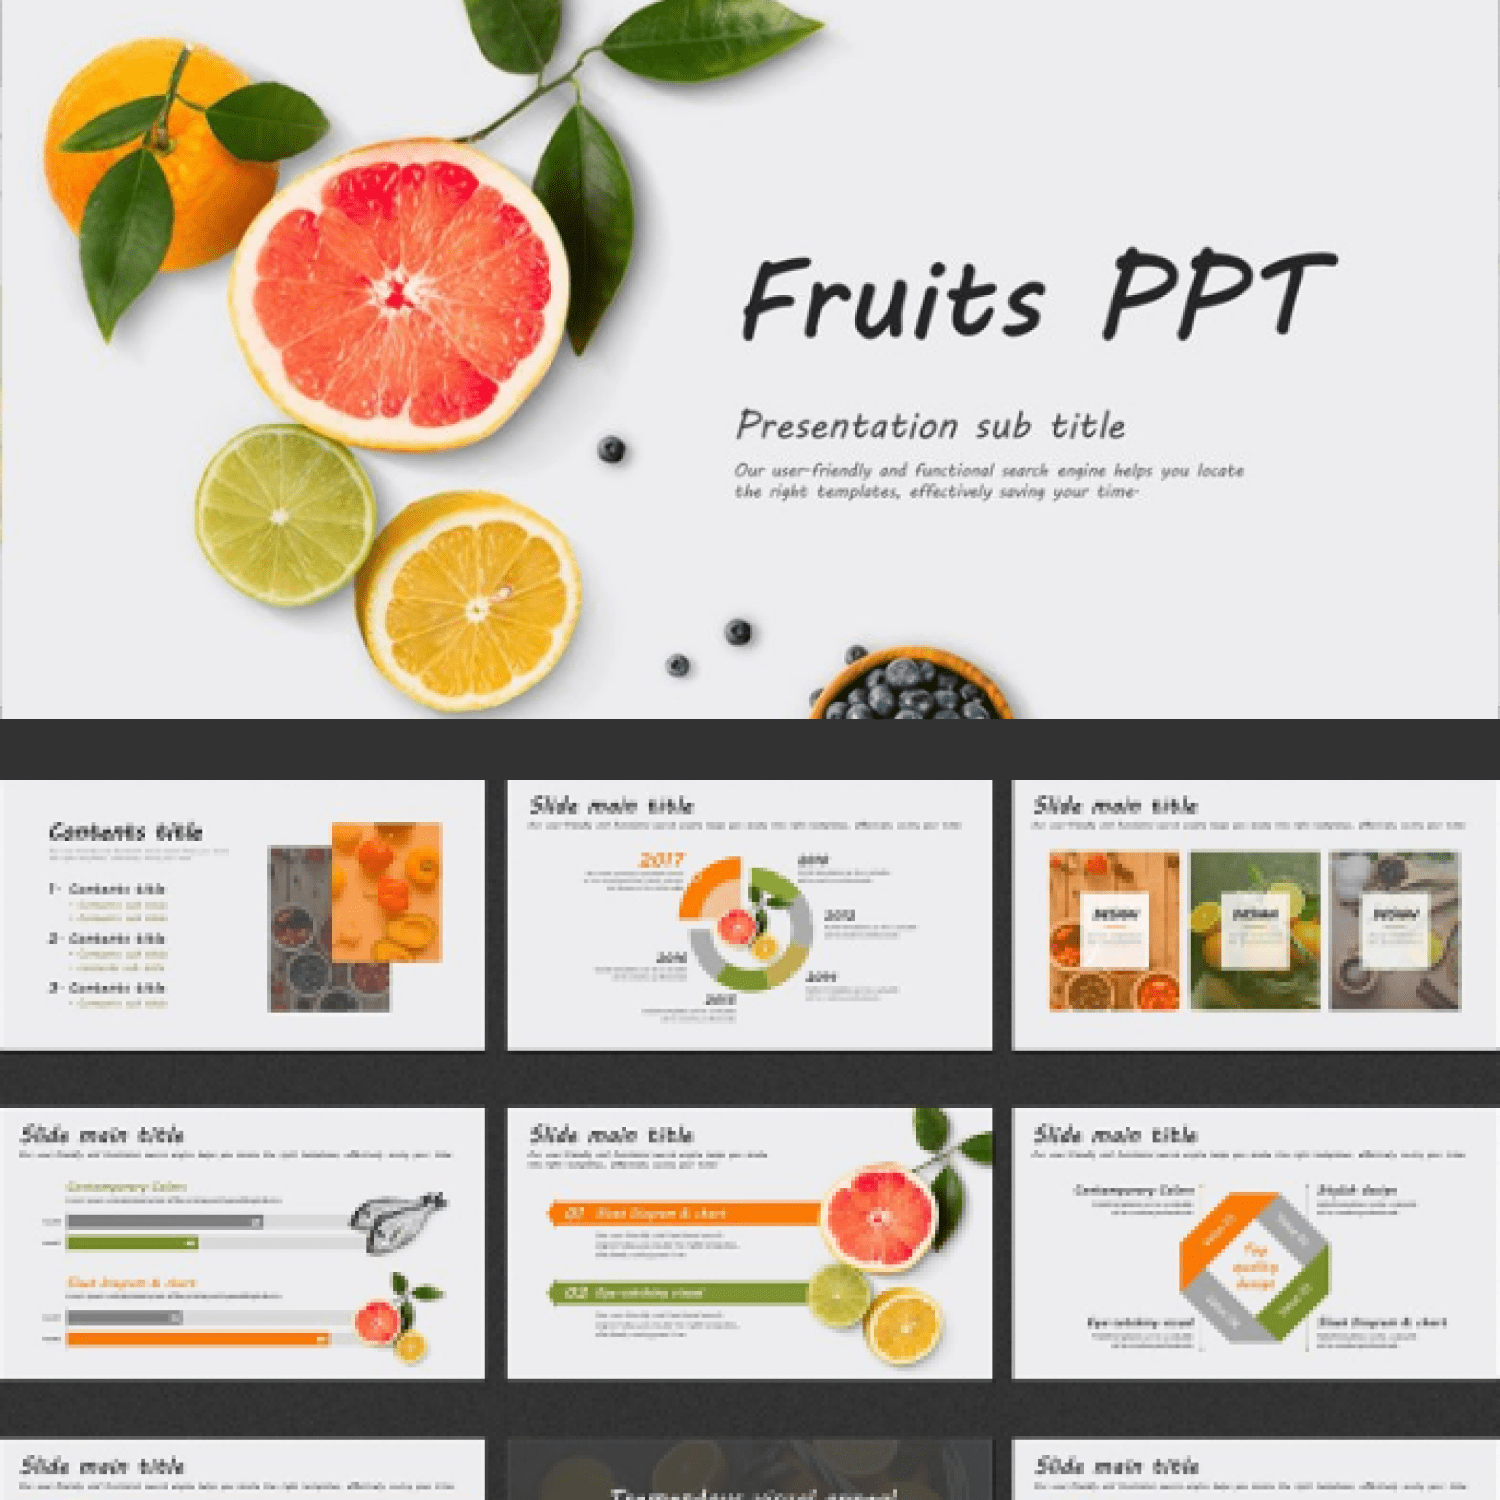 Fruits PPT Template cover image.